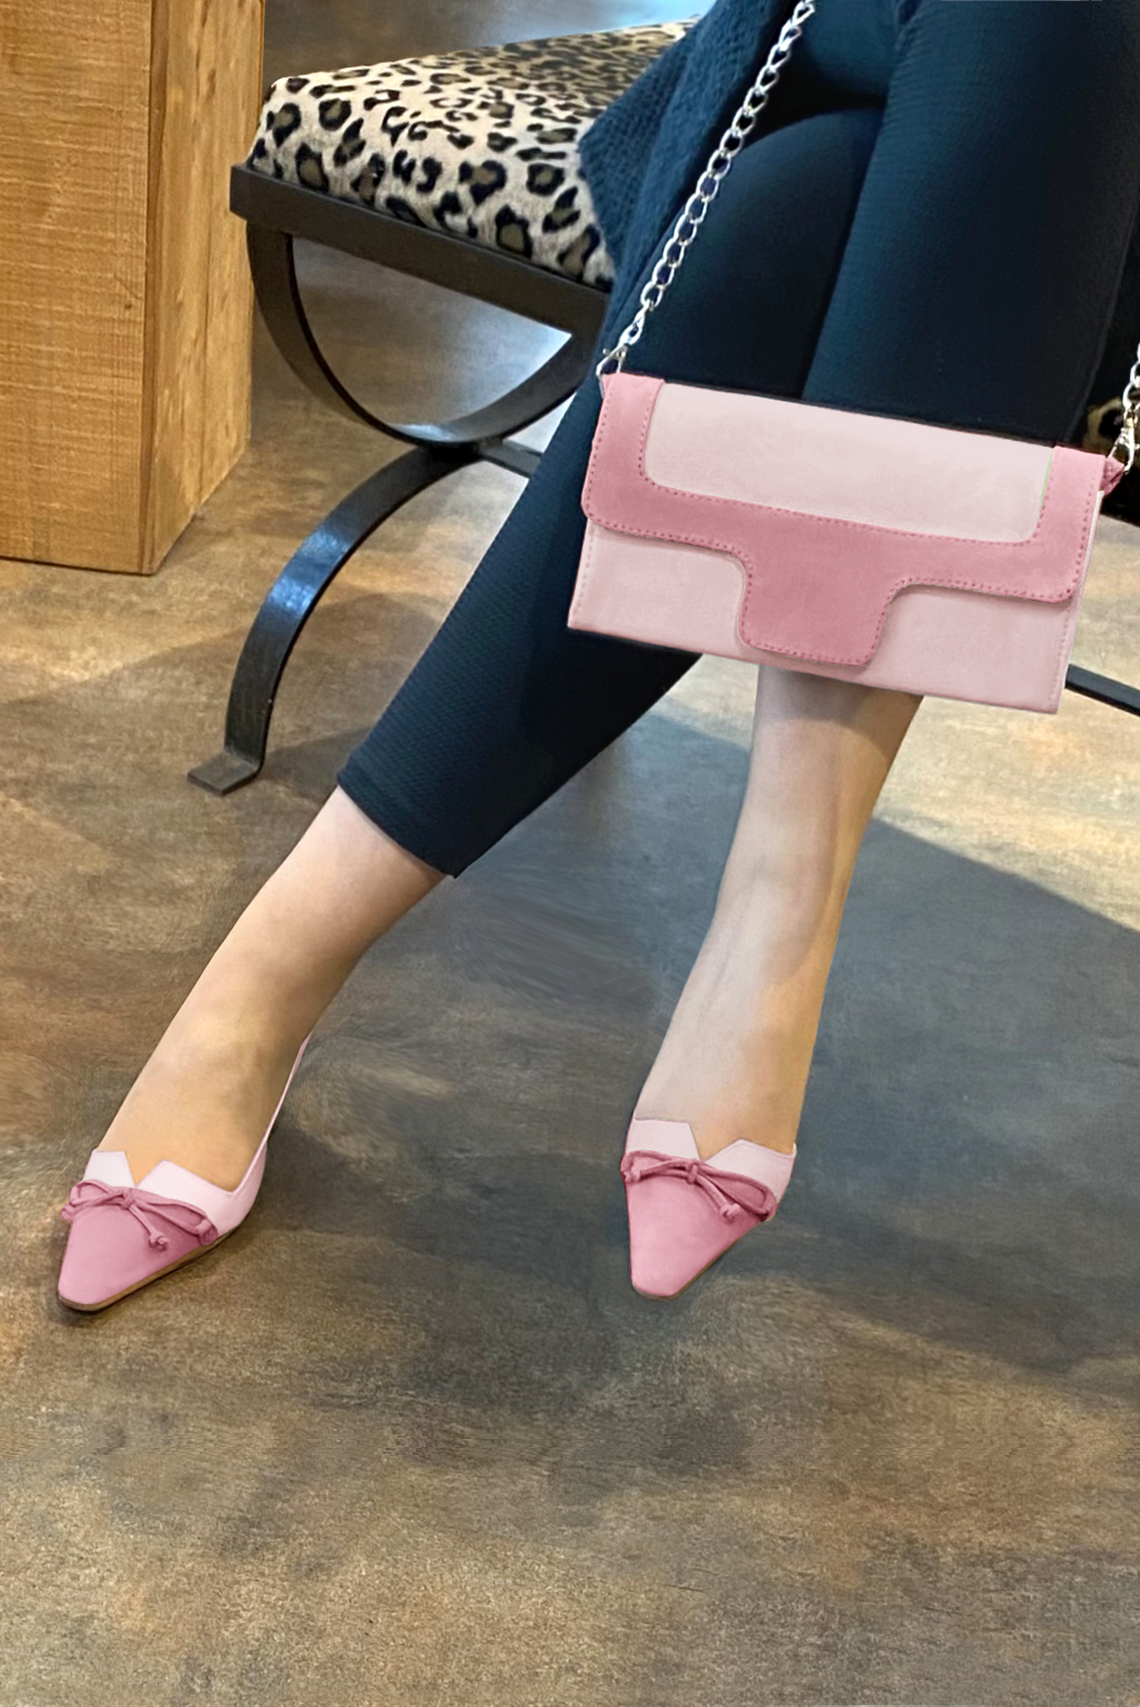 Carnation pink matching shoes and clutch. Worn view - Florence KOOIJMAN